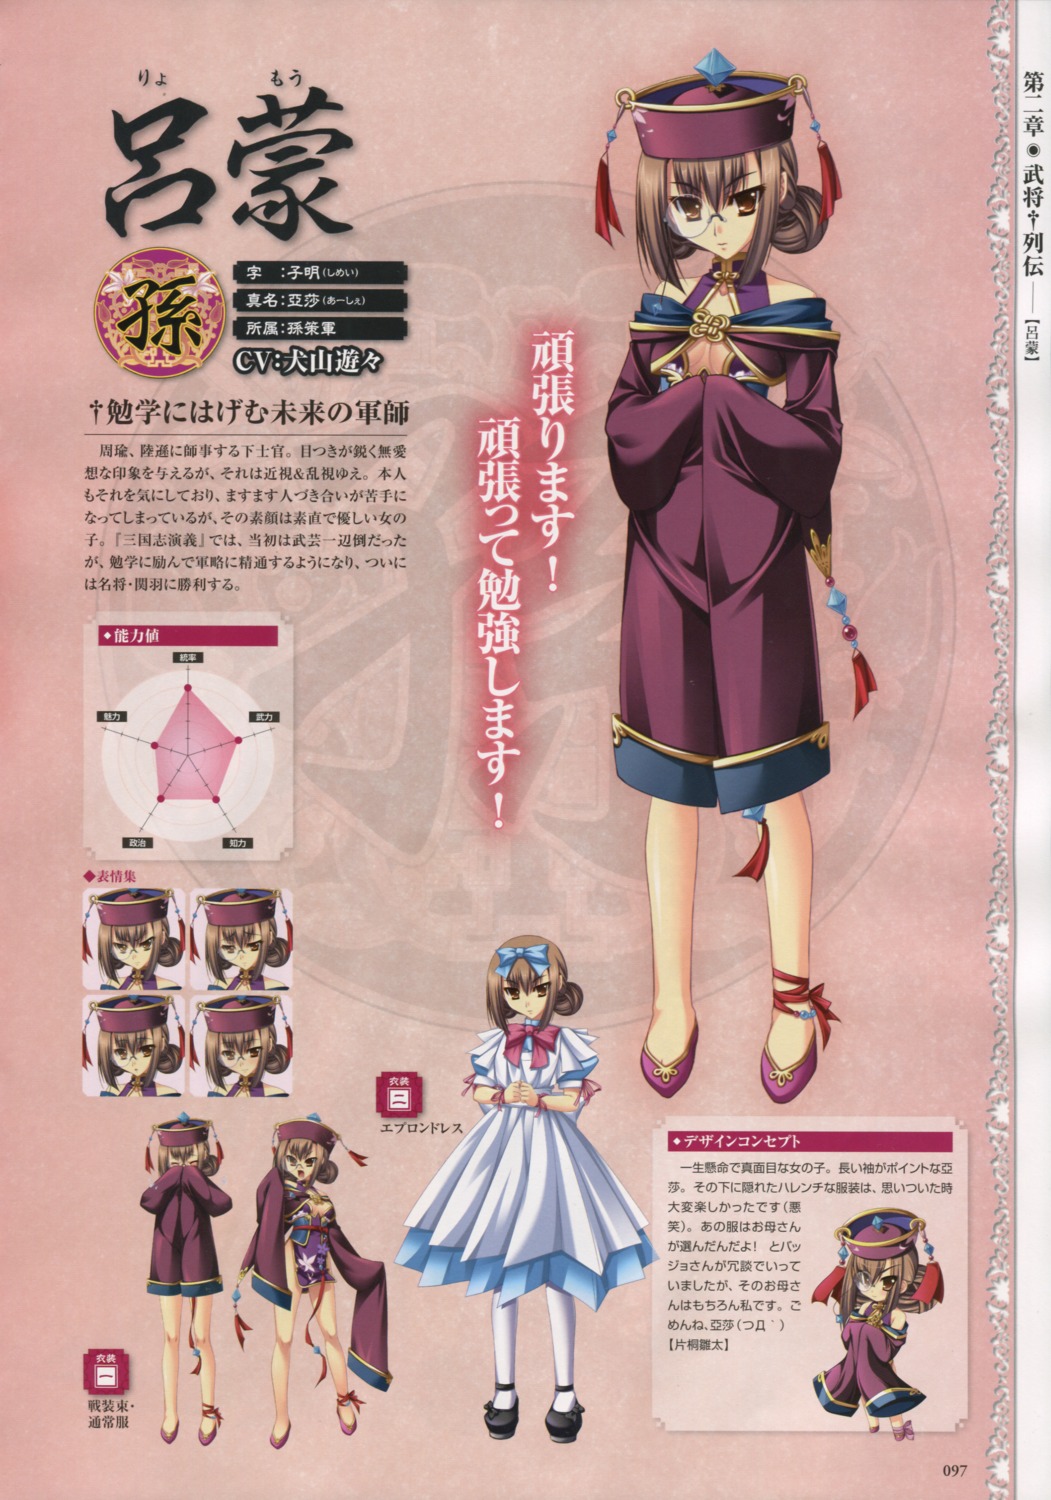 asian_clothes baseson character_design chibi dress expression koihime_musou megane profile_page ryomou